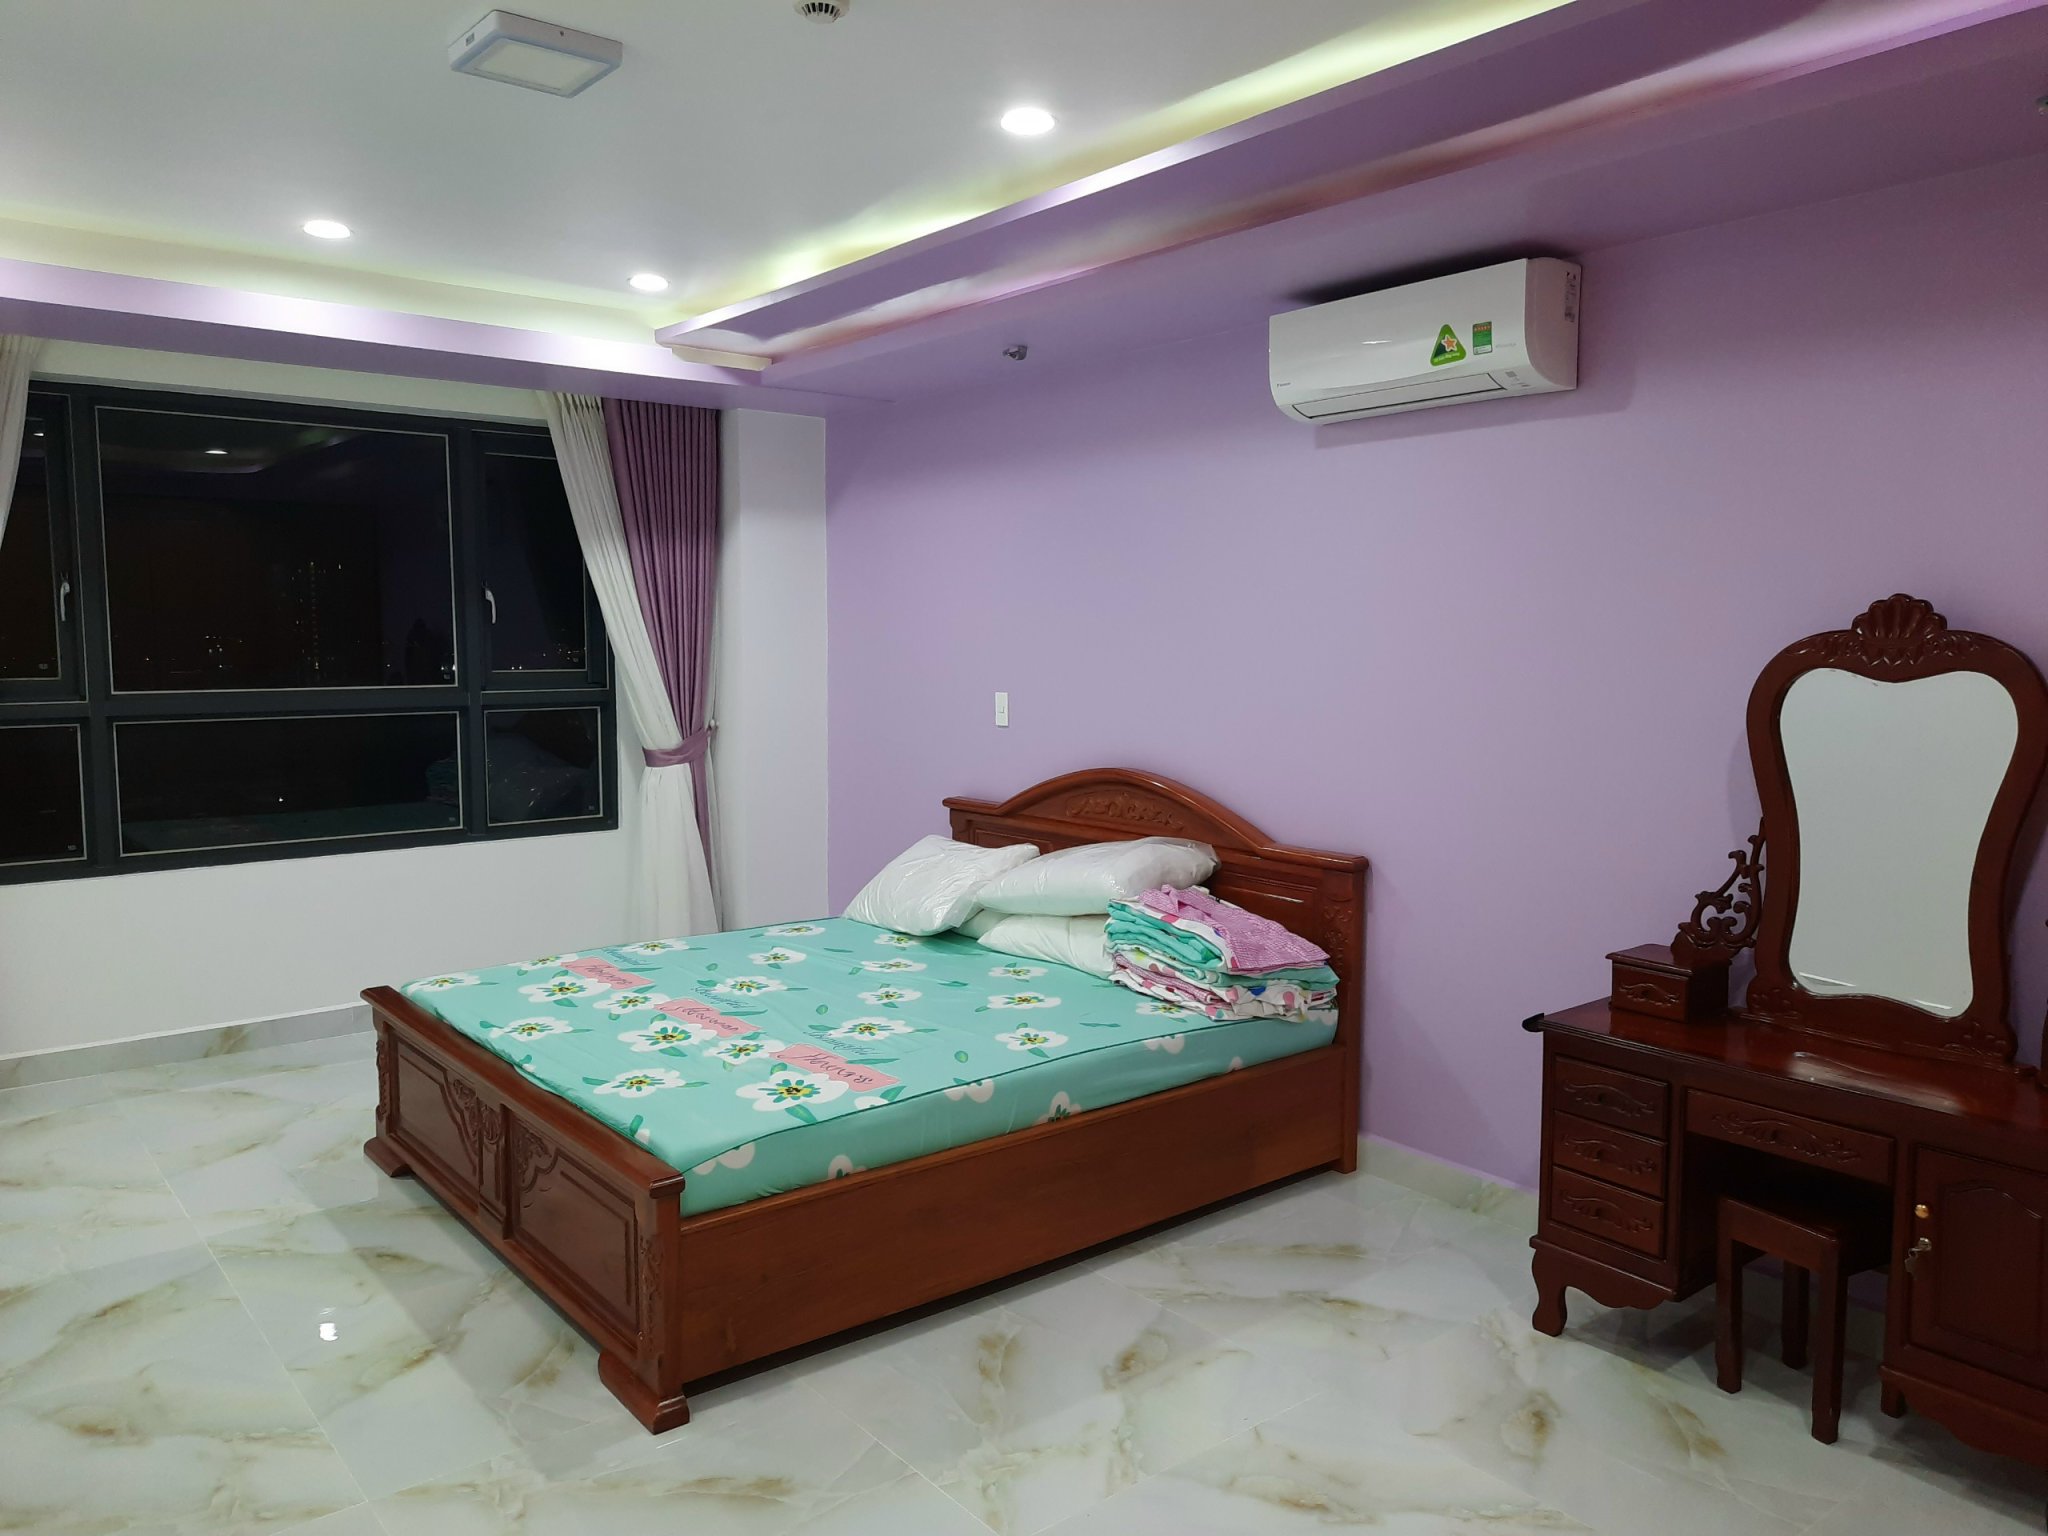 Apartment-for-rent-in-Nam-Phuc-wooden-furniture (6)